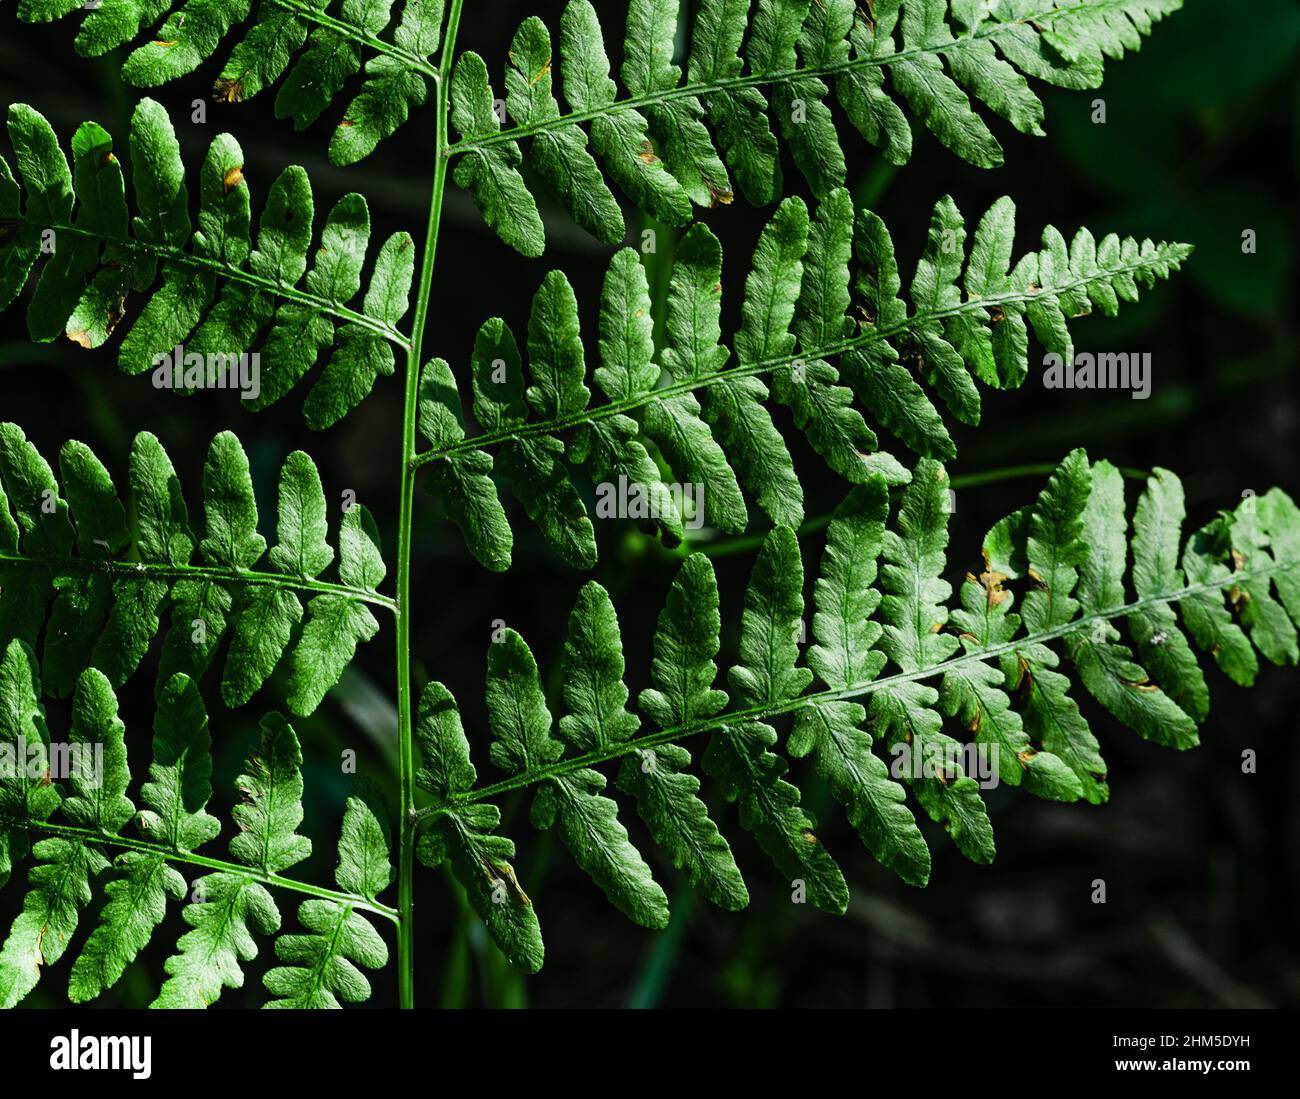 Close up of Fern frond on dark background Stock Photo